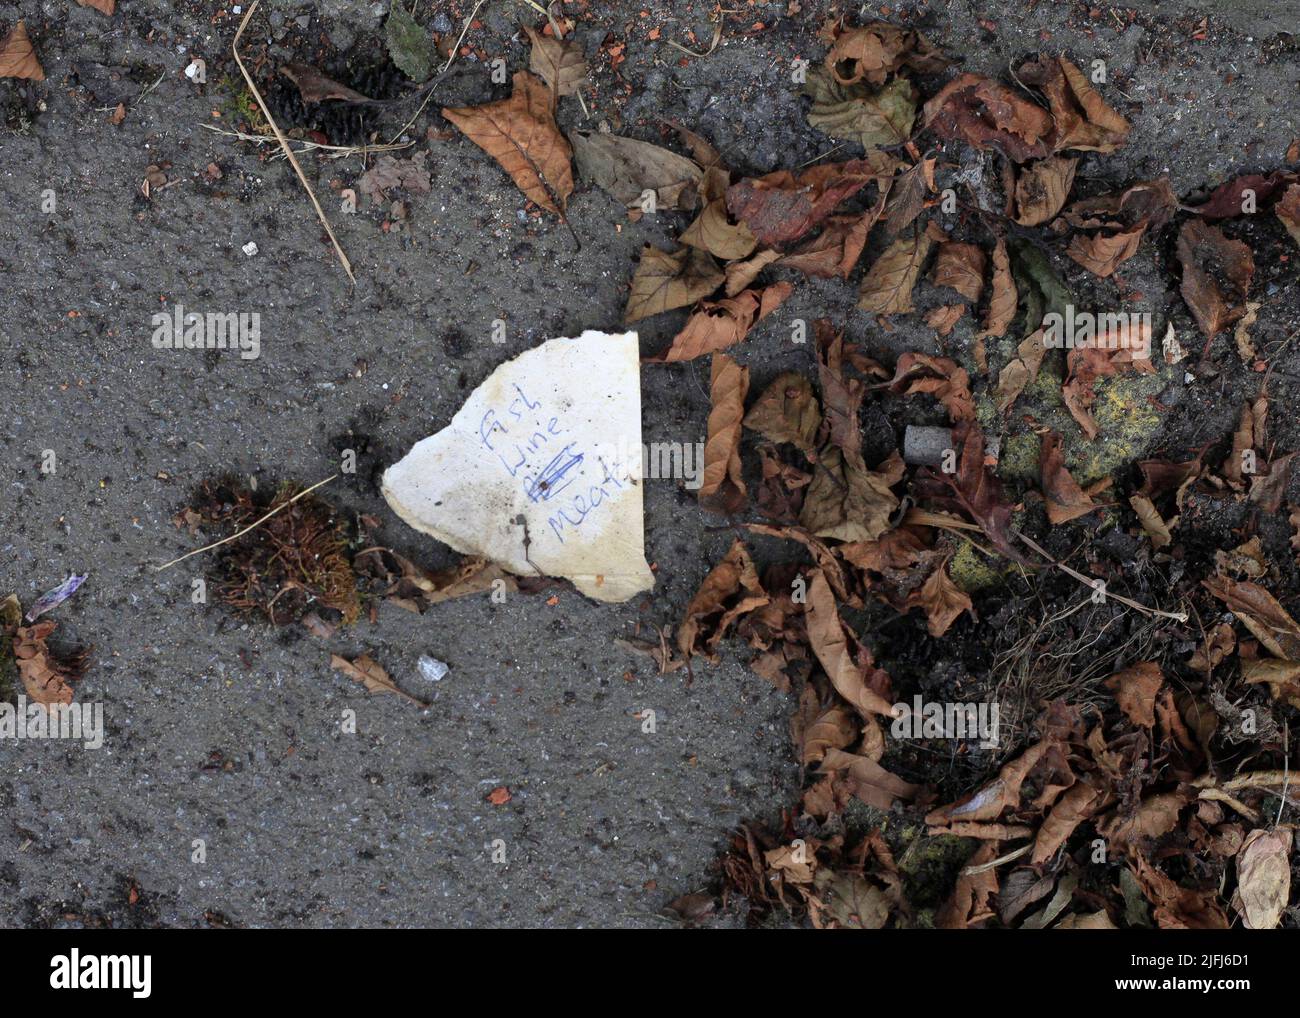 A dropped shopping list meat fish wine on the pavement amongst fallen leaves Stock Photo